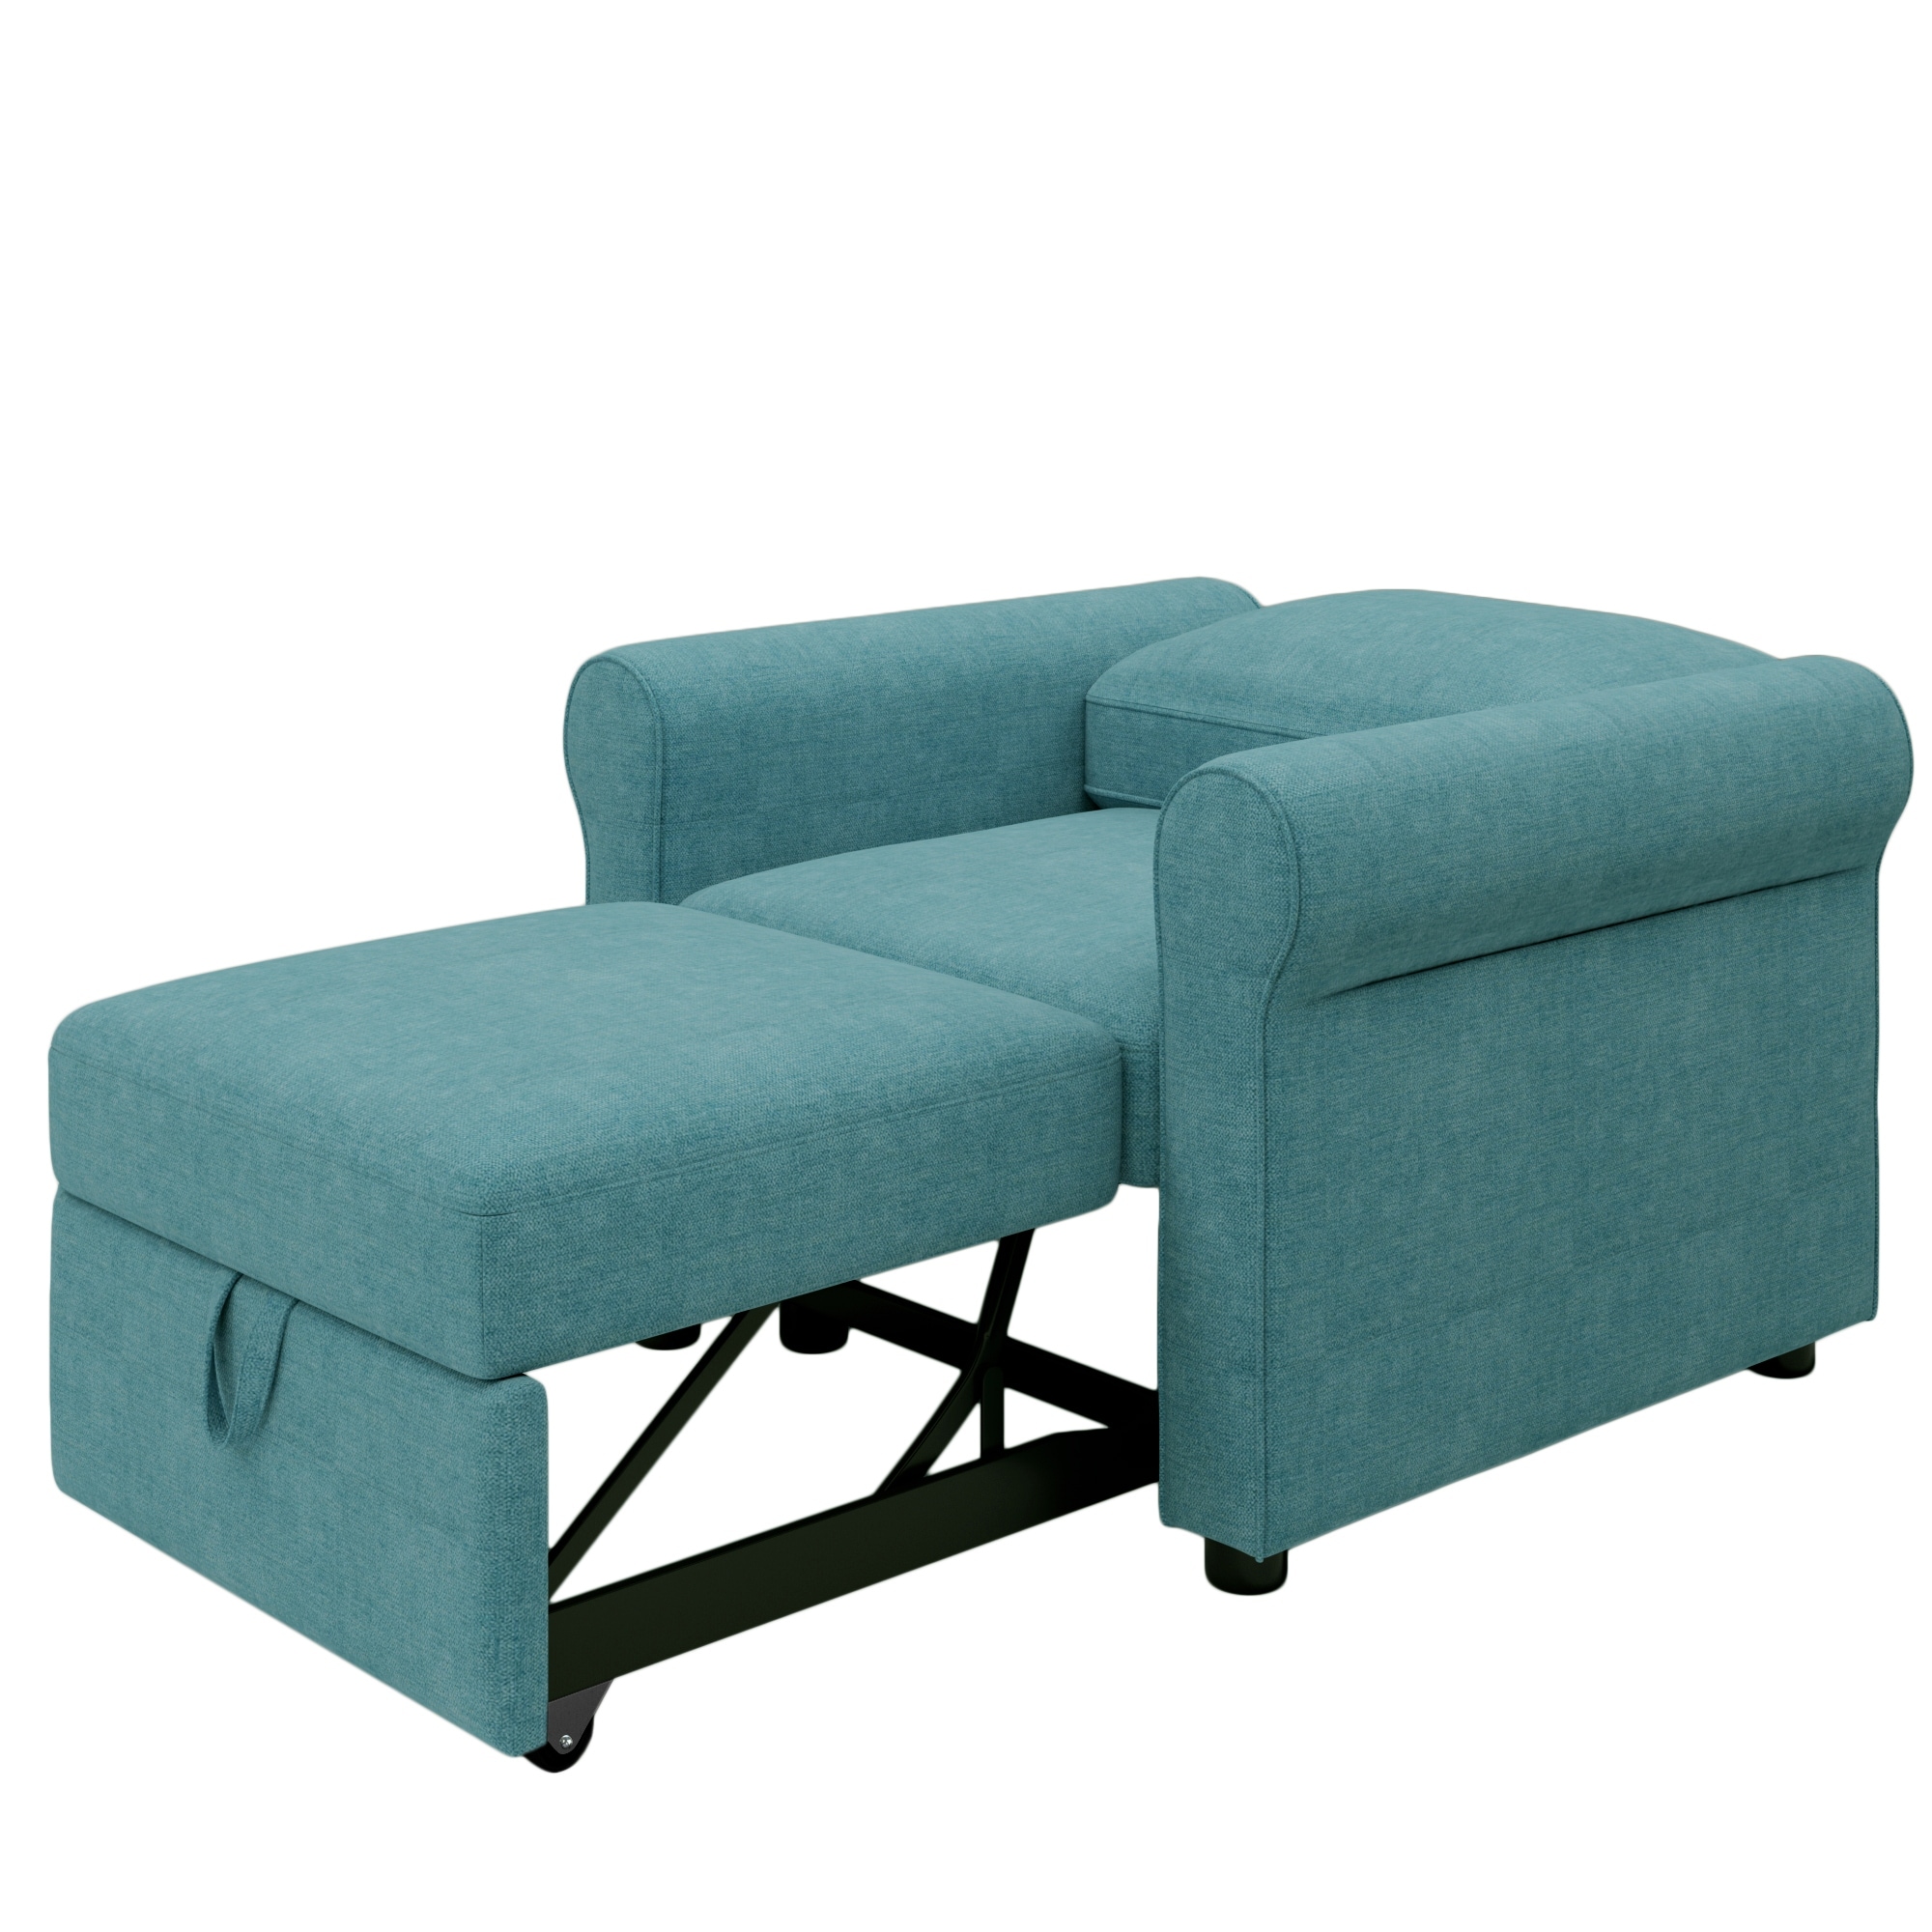 3-in-1 Sofa Bed Chair Convertible Sleeper Chair Bed Adjust Backrest Single Sofa Bed Livingroom Accent Chair, Teal